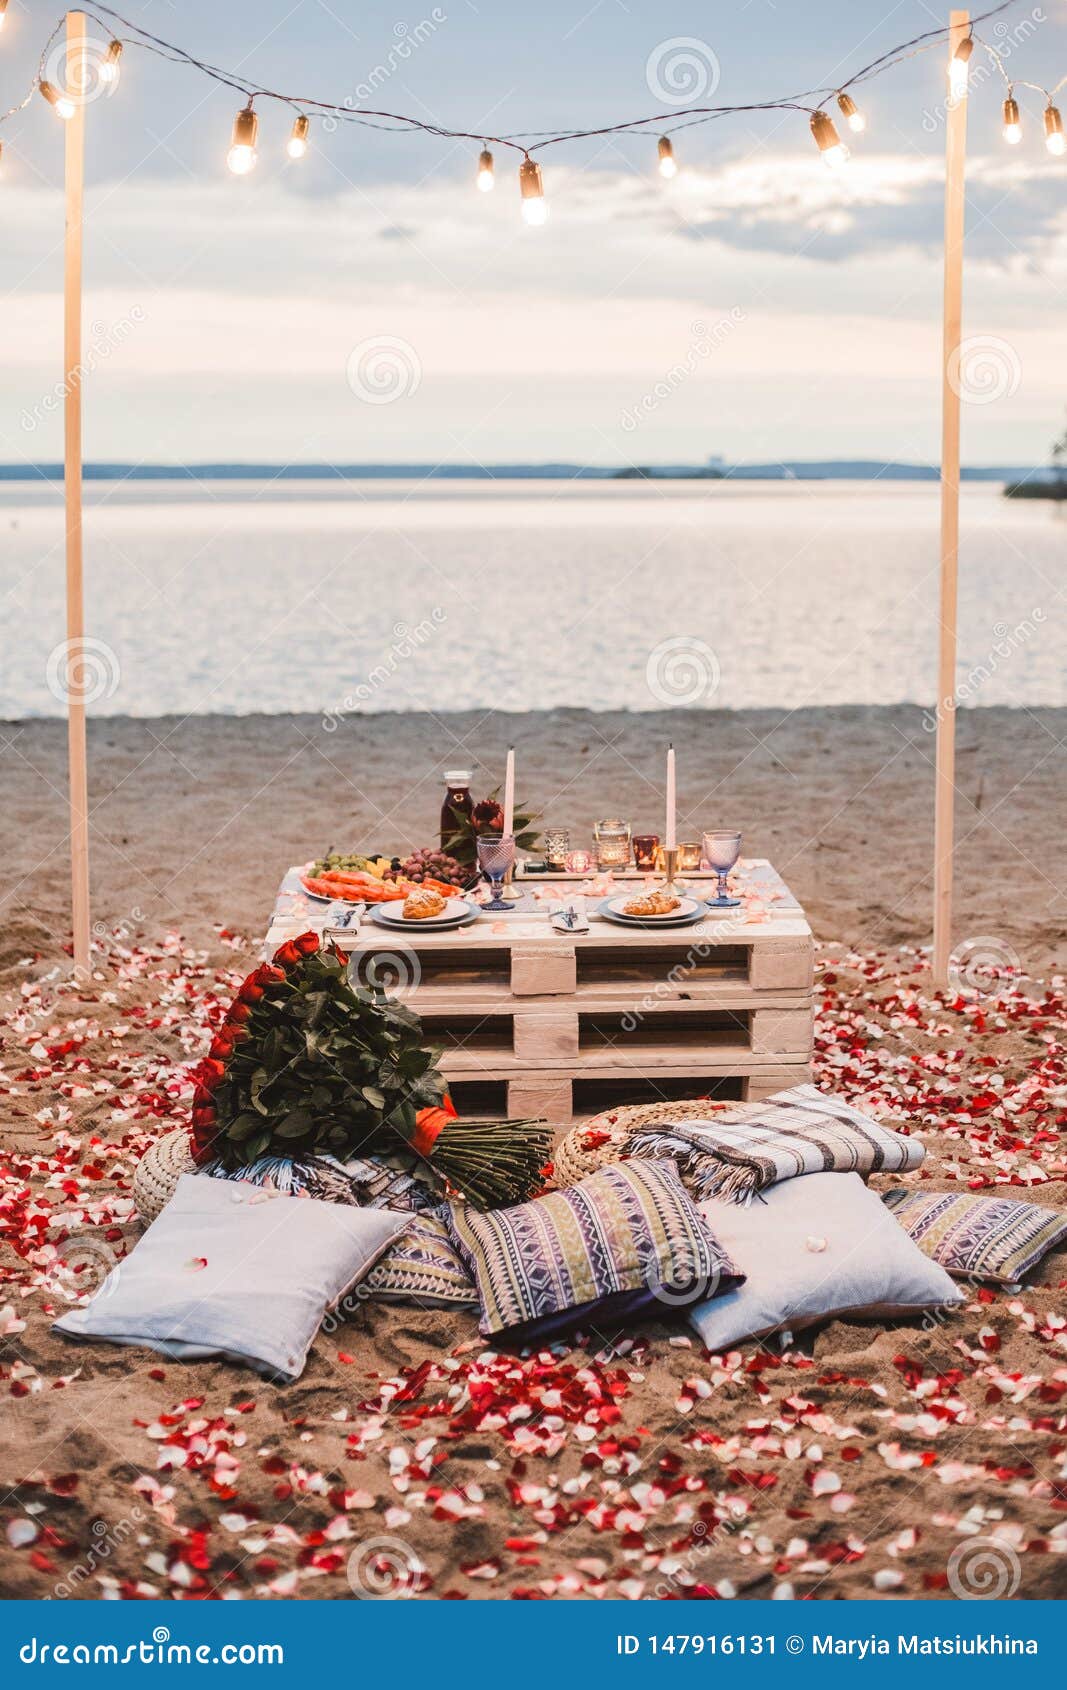 Romantic Dinner at the Beach Concept Stock Image - Image of evening